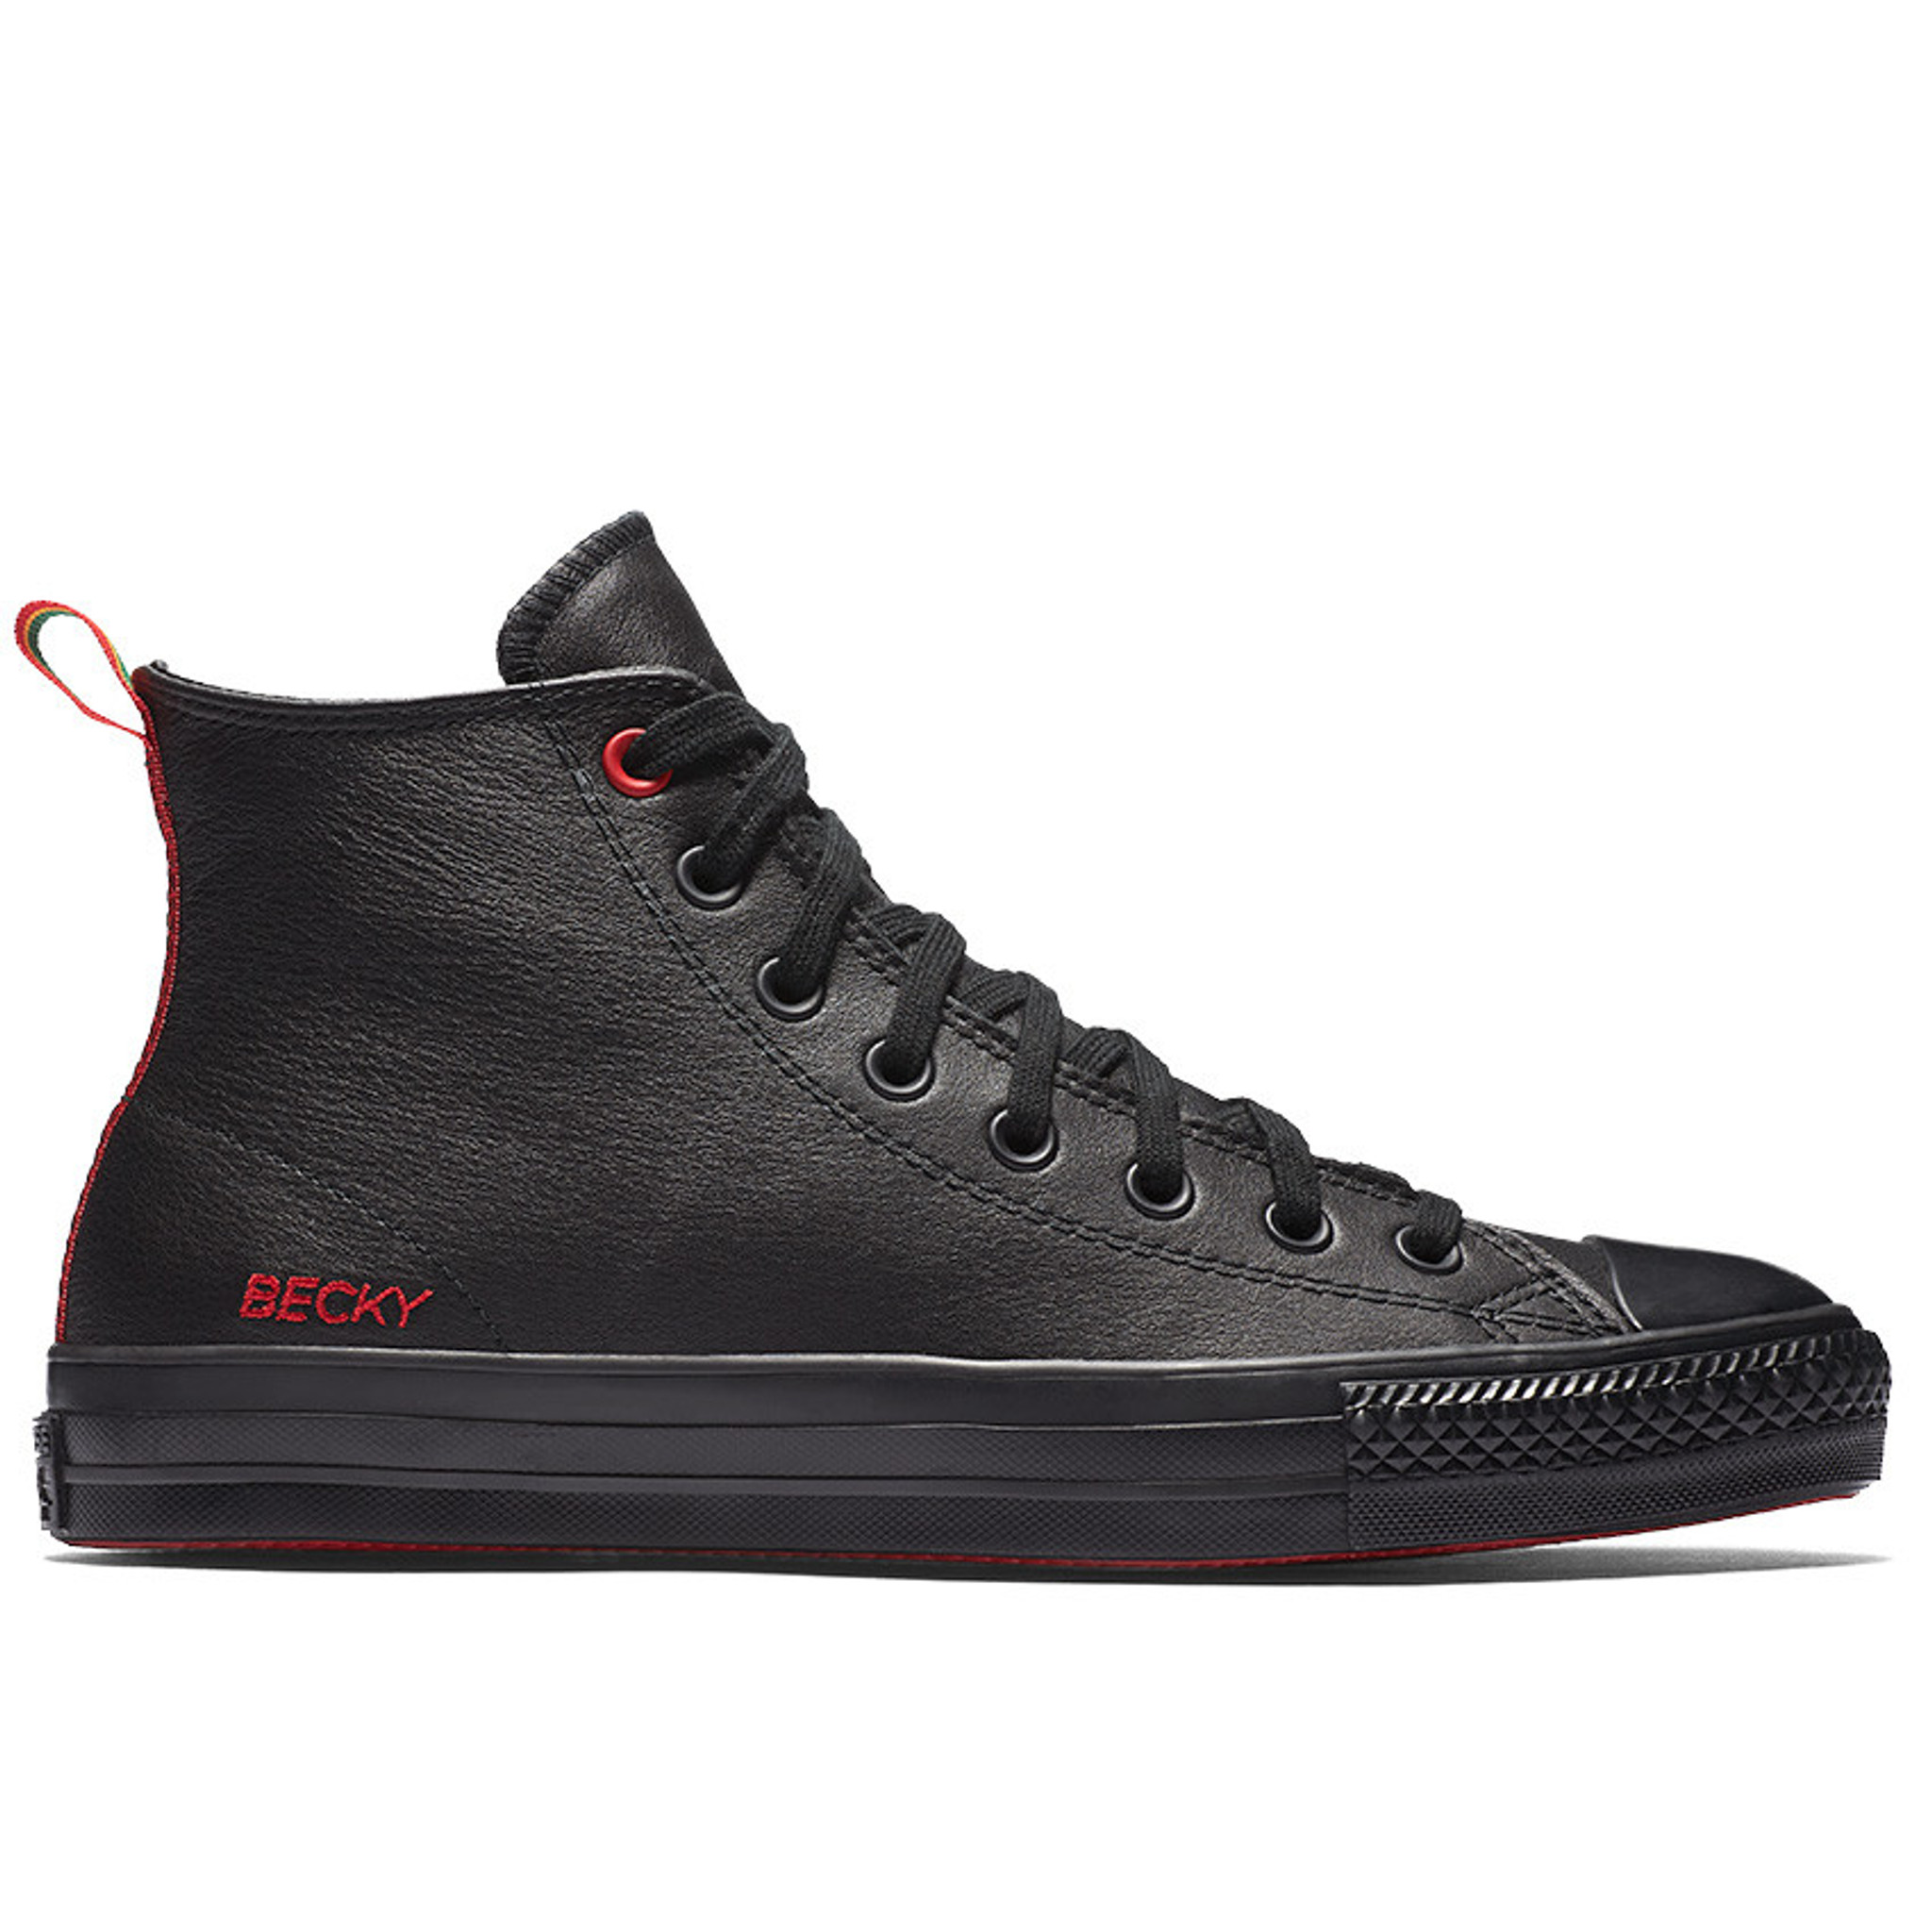 Converse CONS Pro Eli Reed High Top FREE USA SHIPPING Sneakers FREE SHIPPING CONS SKateboard FREE SHIPPING